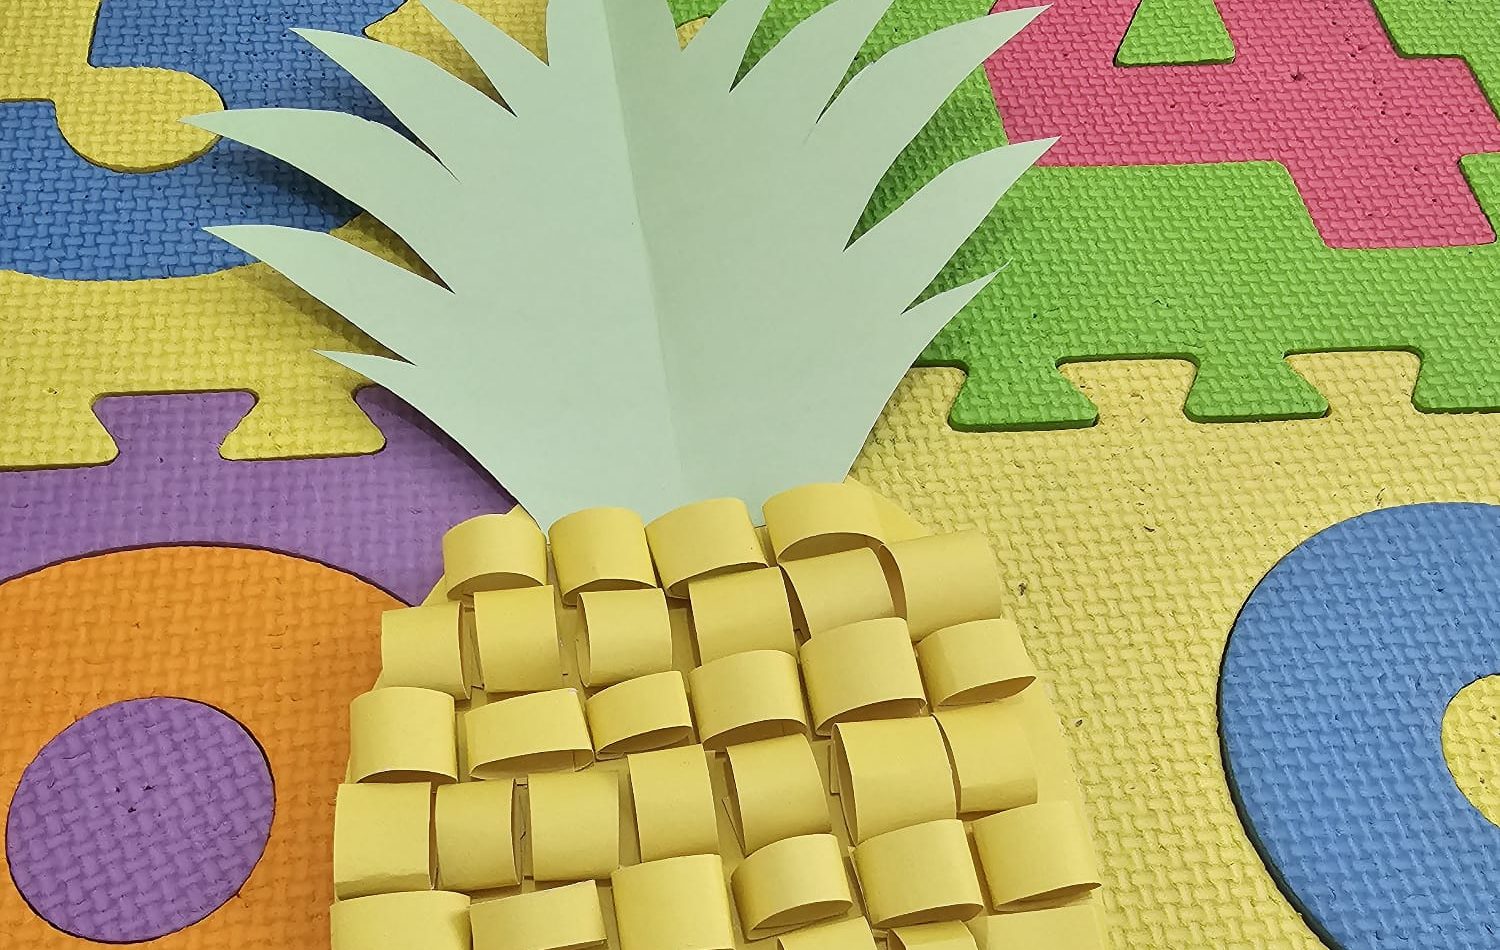 A 3D collage of a pineapple.